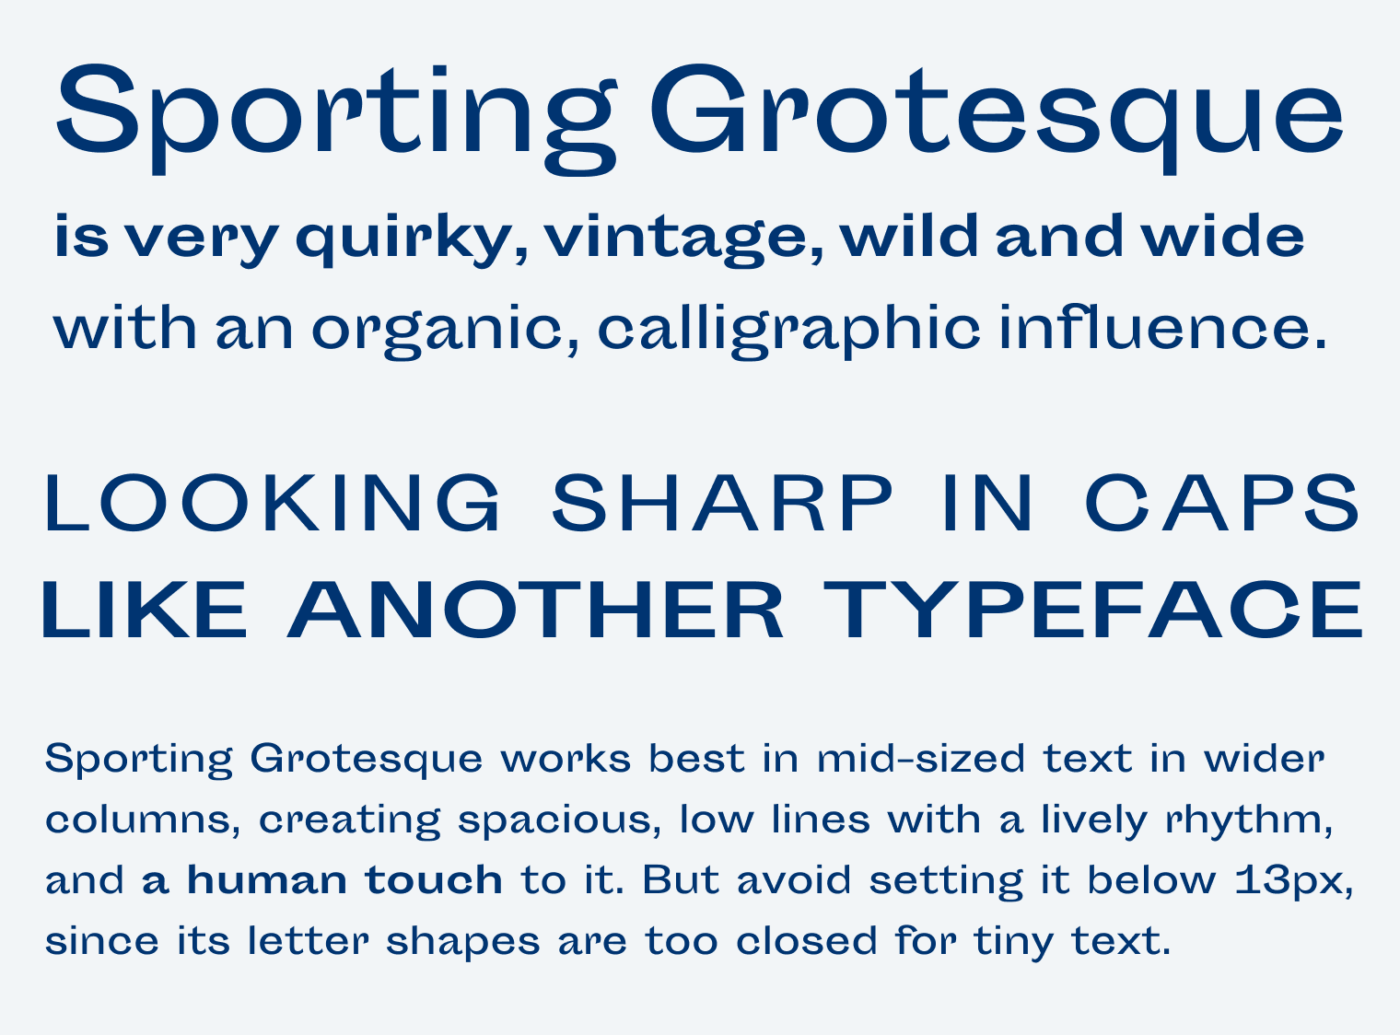 Sporting Grotesque is very quirky, vintage, wild and wide with an organic, calligraphic influence. LOOKING SHARP IN CAPS LIKE ANOTHER TYPEFACE Sporting Grotesque works best in mid-sized text in wider columns, creating spacious, low lines with a lively rhythm, and a human touch to it. But avoid setting it below 13px, since its letter shapes are too closed for tiny text.